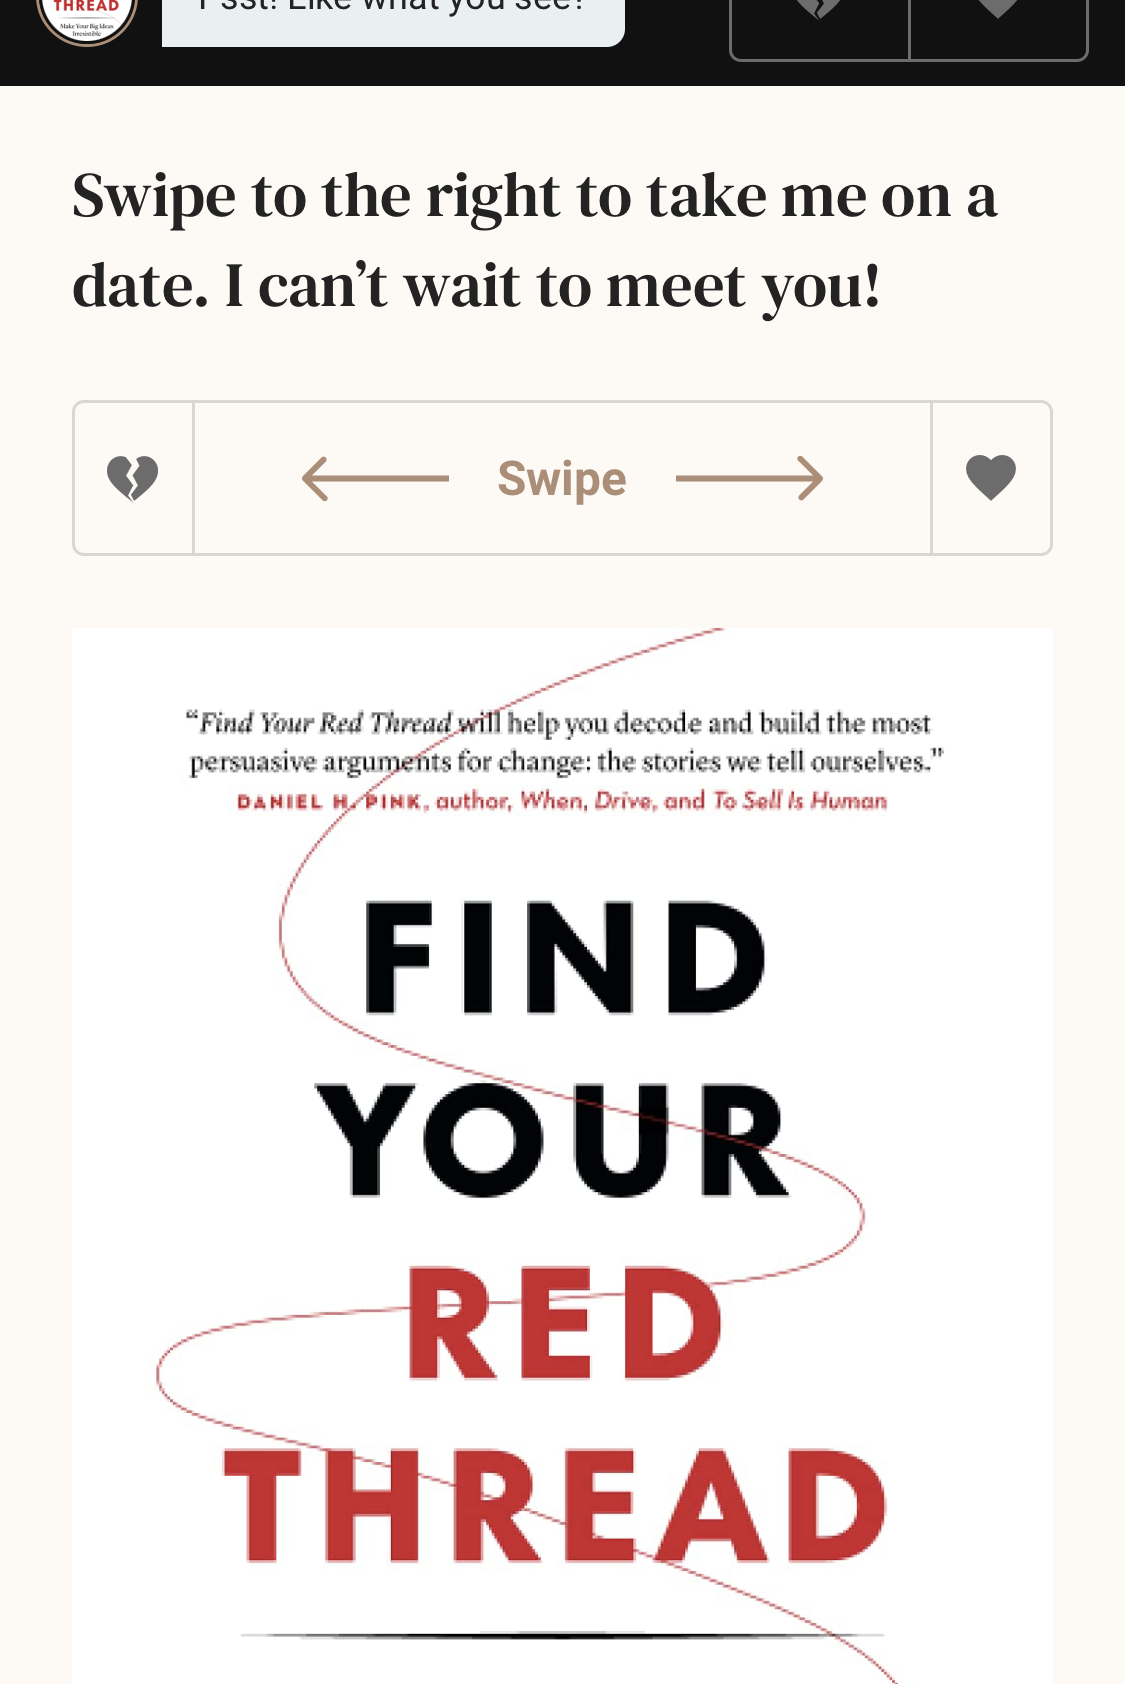 the book cover below the text, swipe right to take me on a date